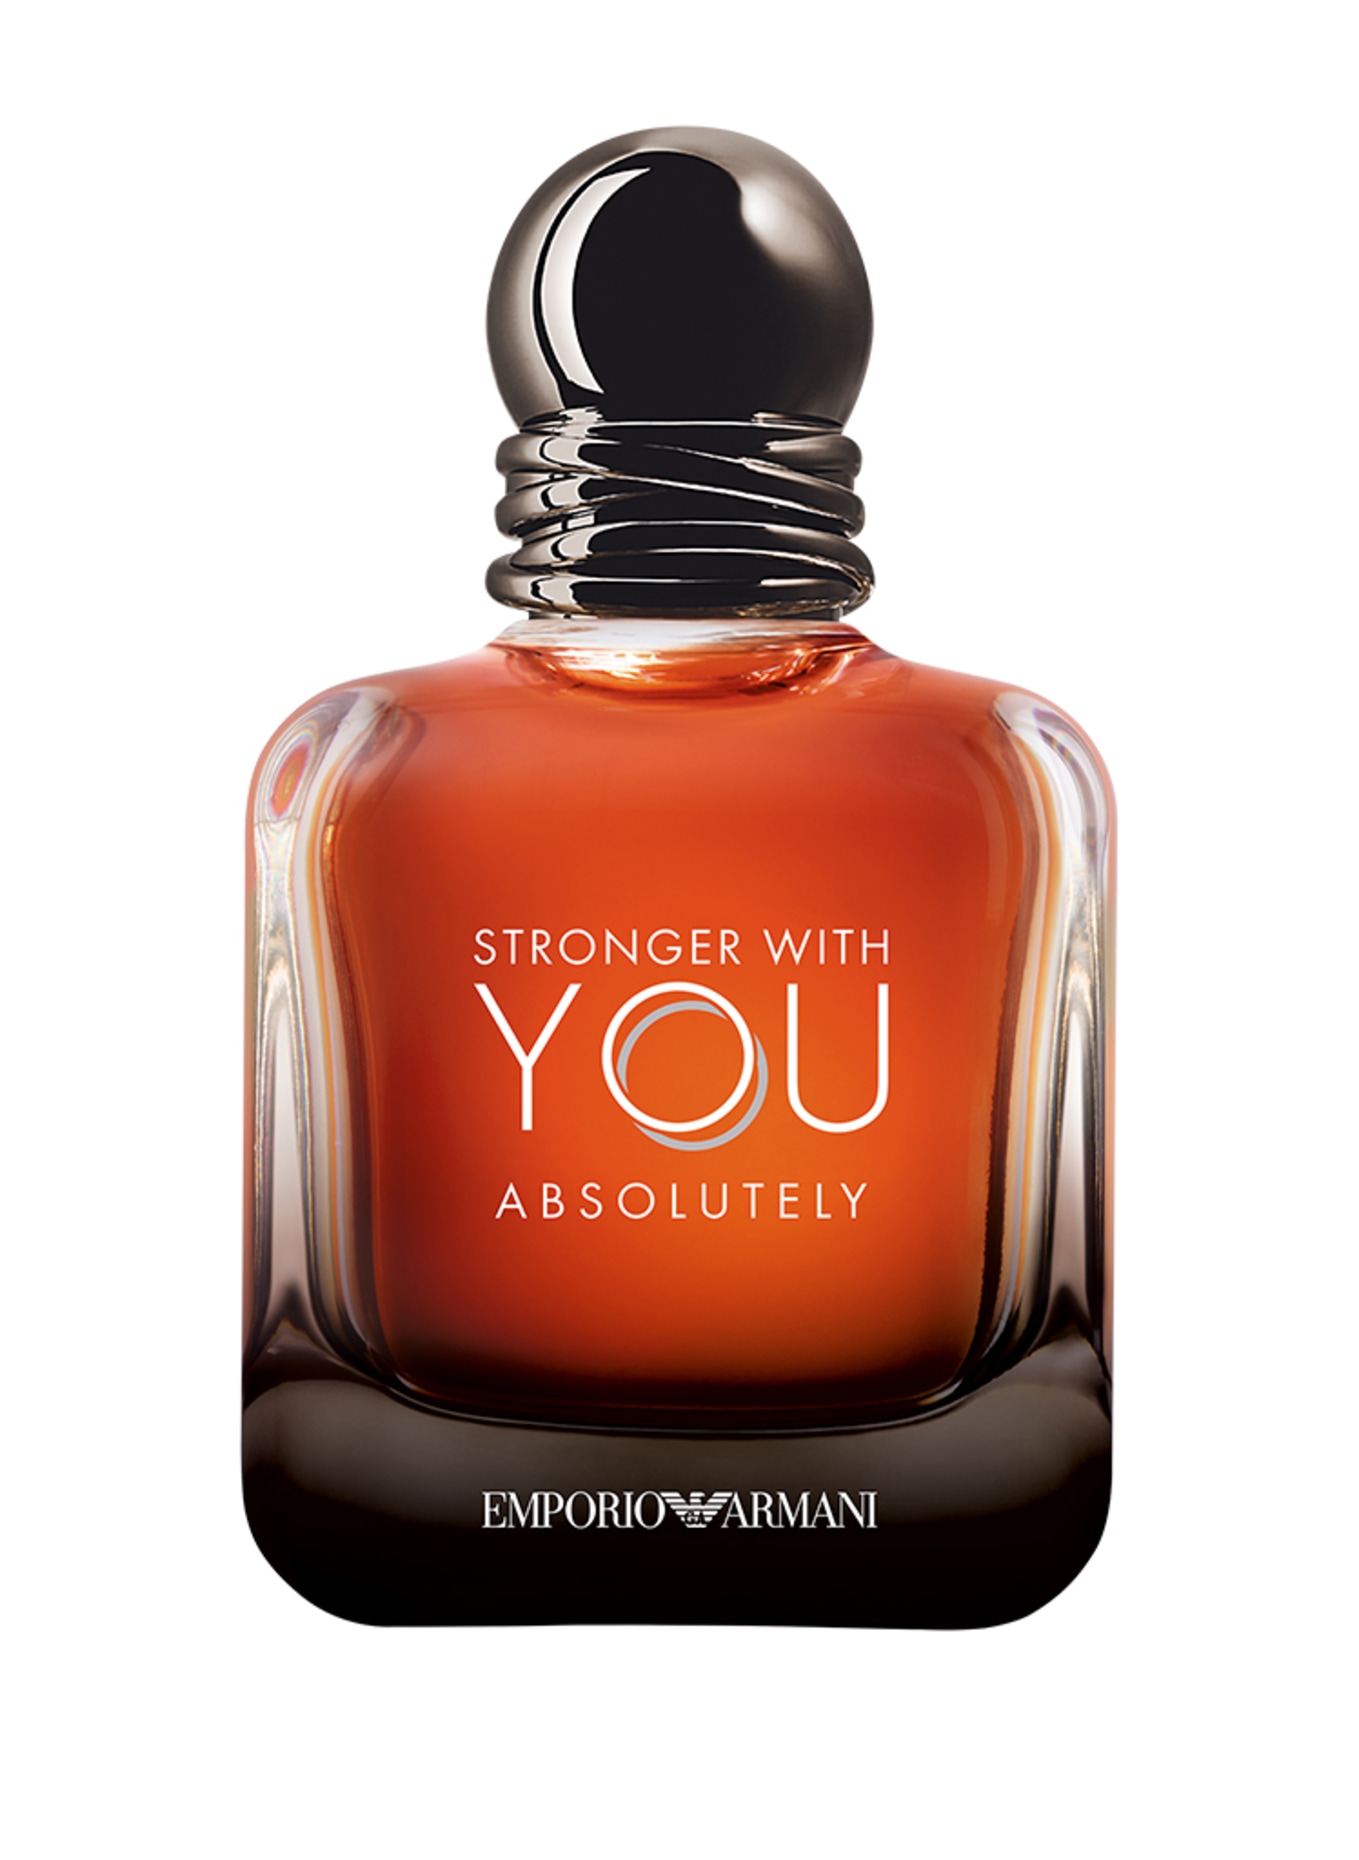 EMPORIO ARMANI STRONGER WITH YOU ABSOLUTELY (Bild 1)